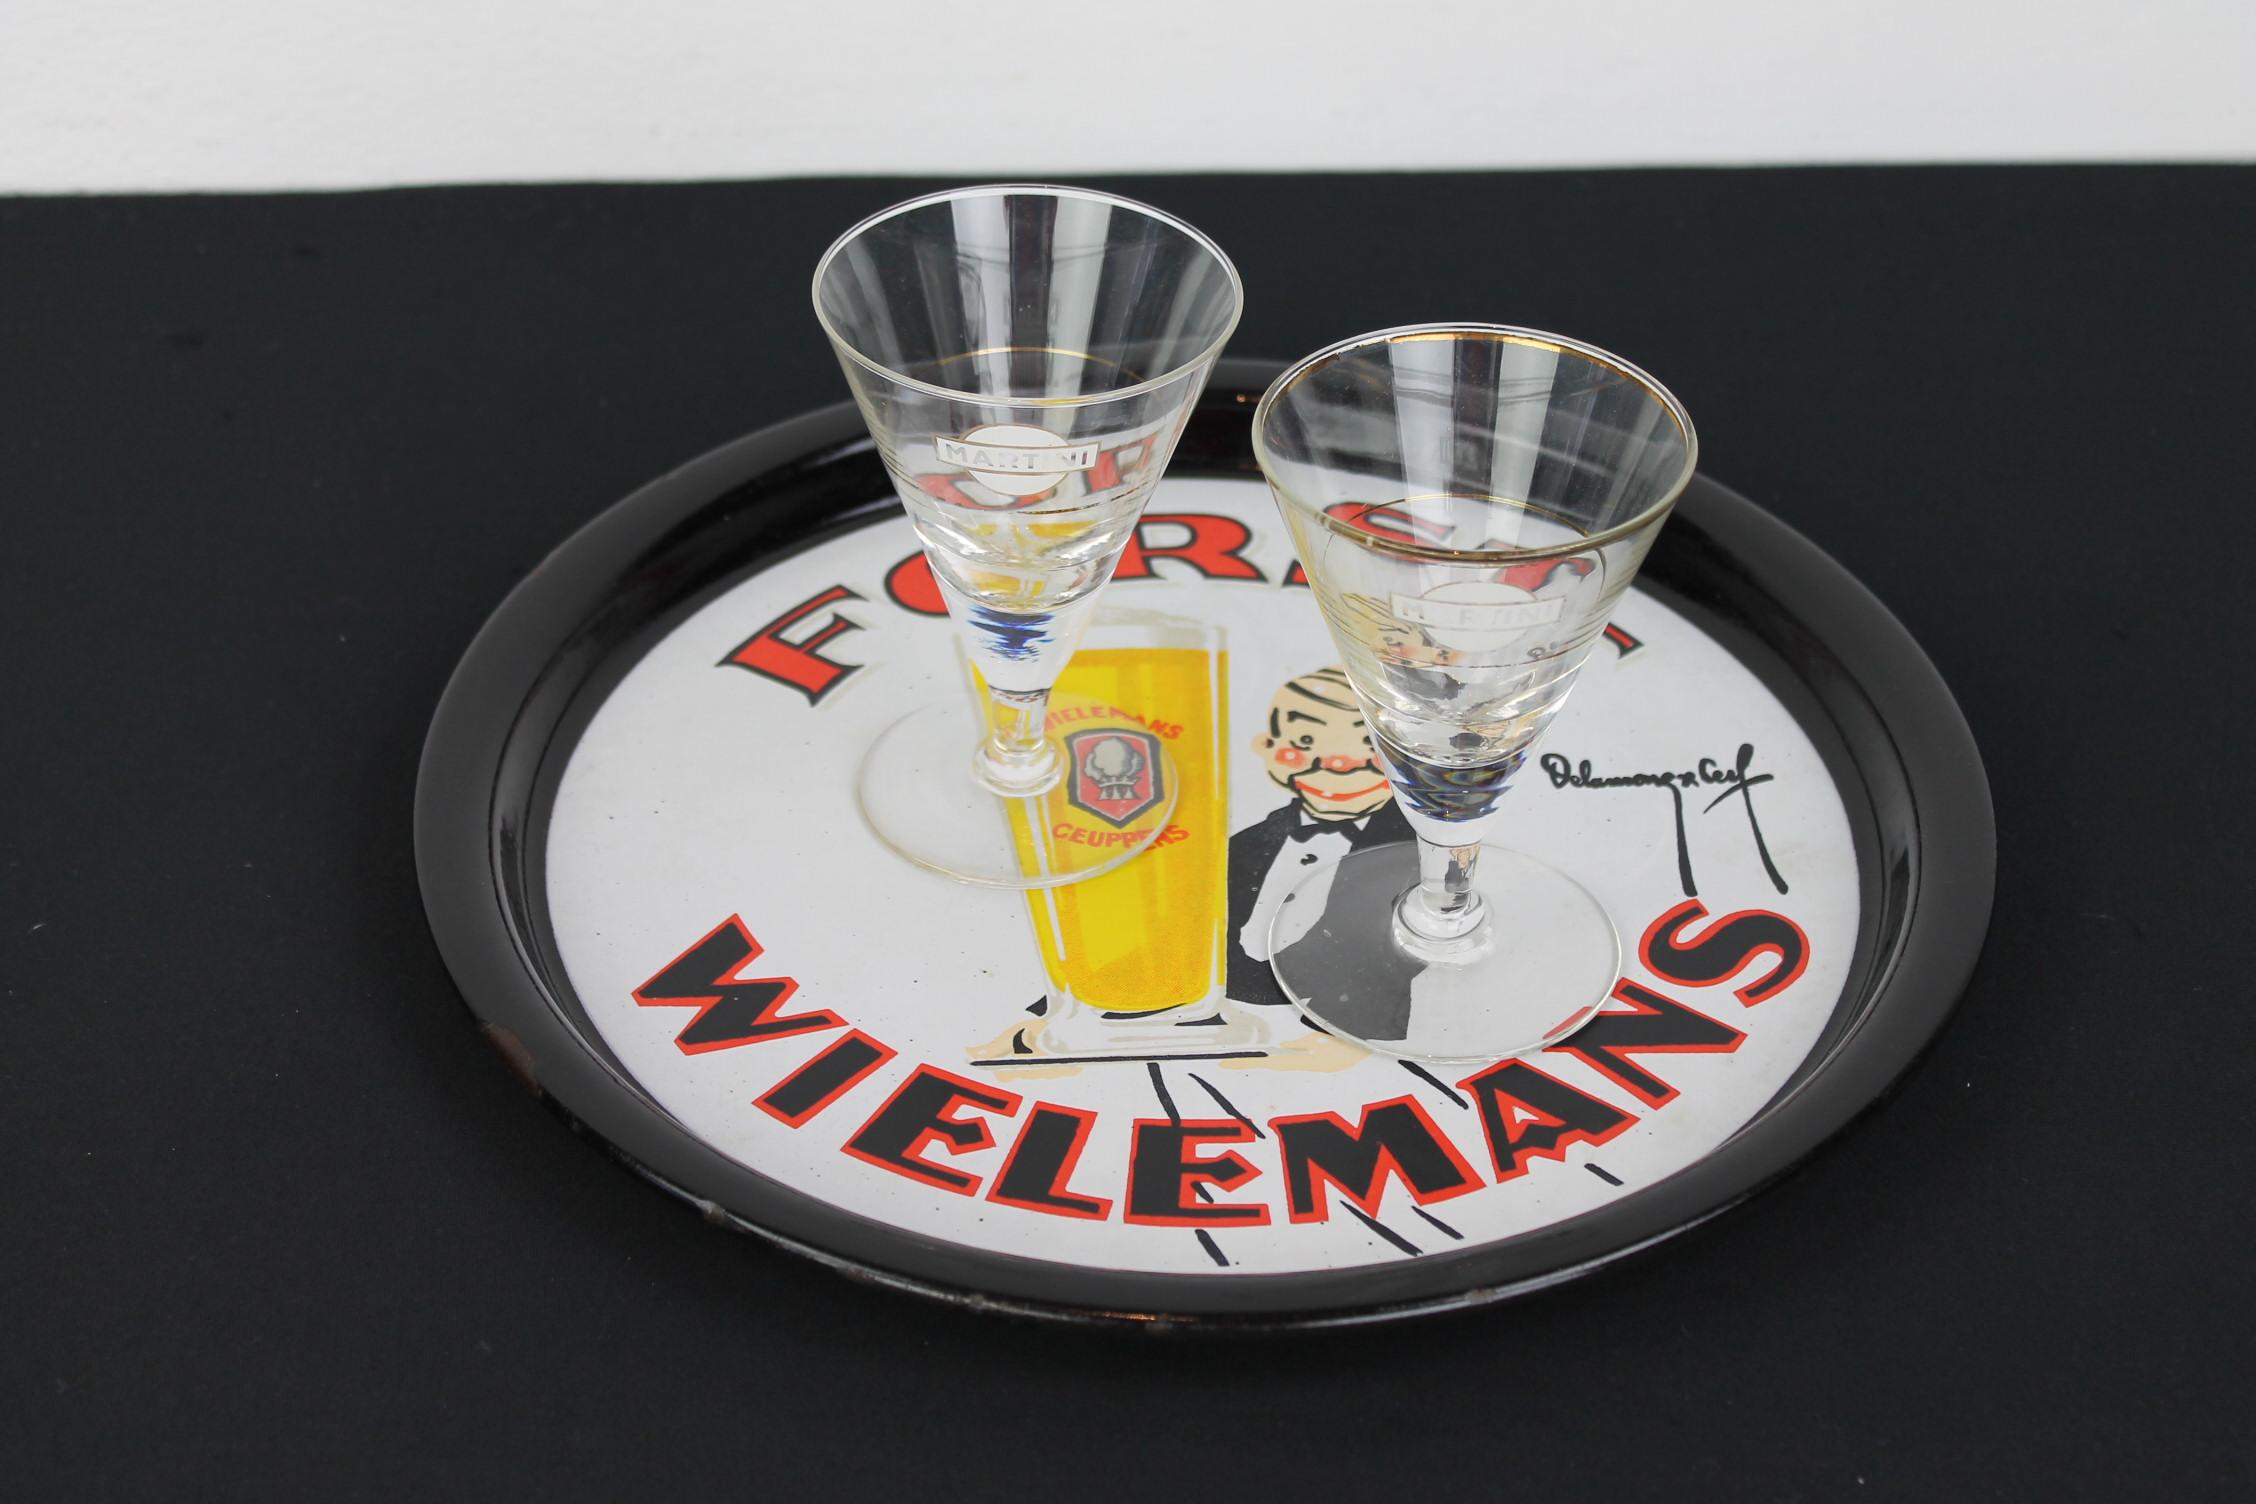 Porcelain tray for the Belgian Brewery Wielemans - Ceuppens which was located in Brussels, Belgium. 
This beer tray has a great design: a waiter serving a giant glass of blond Wielemans - Ceuppens beer which was done by Delamare & Cerf. The enamel